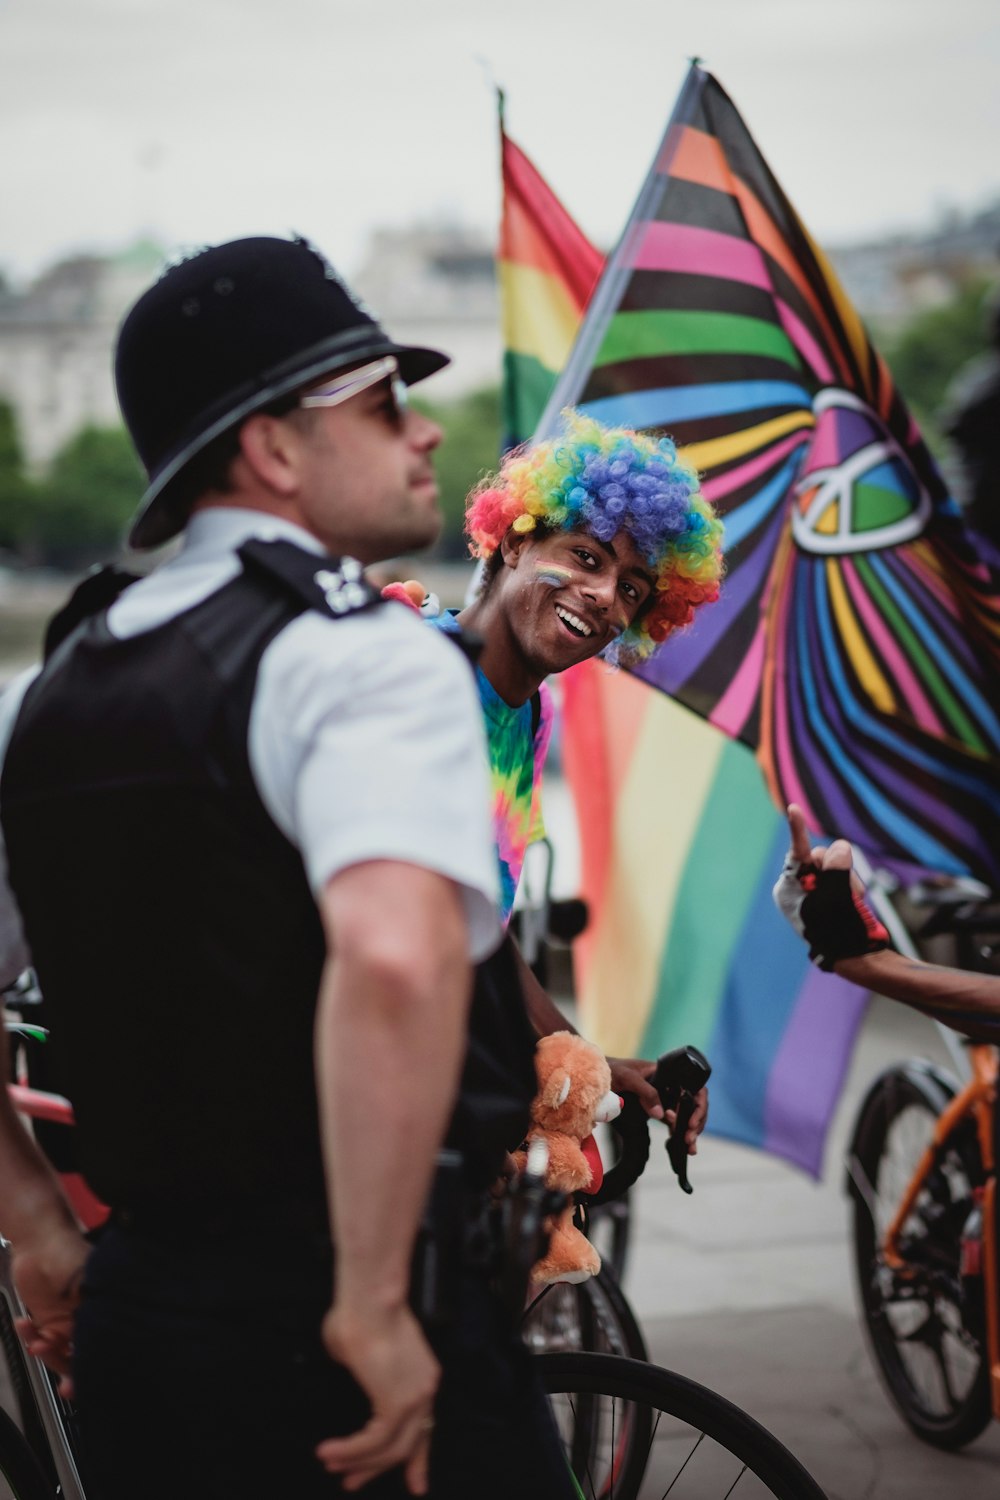 person wearing rainbow wig riding bicycle